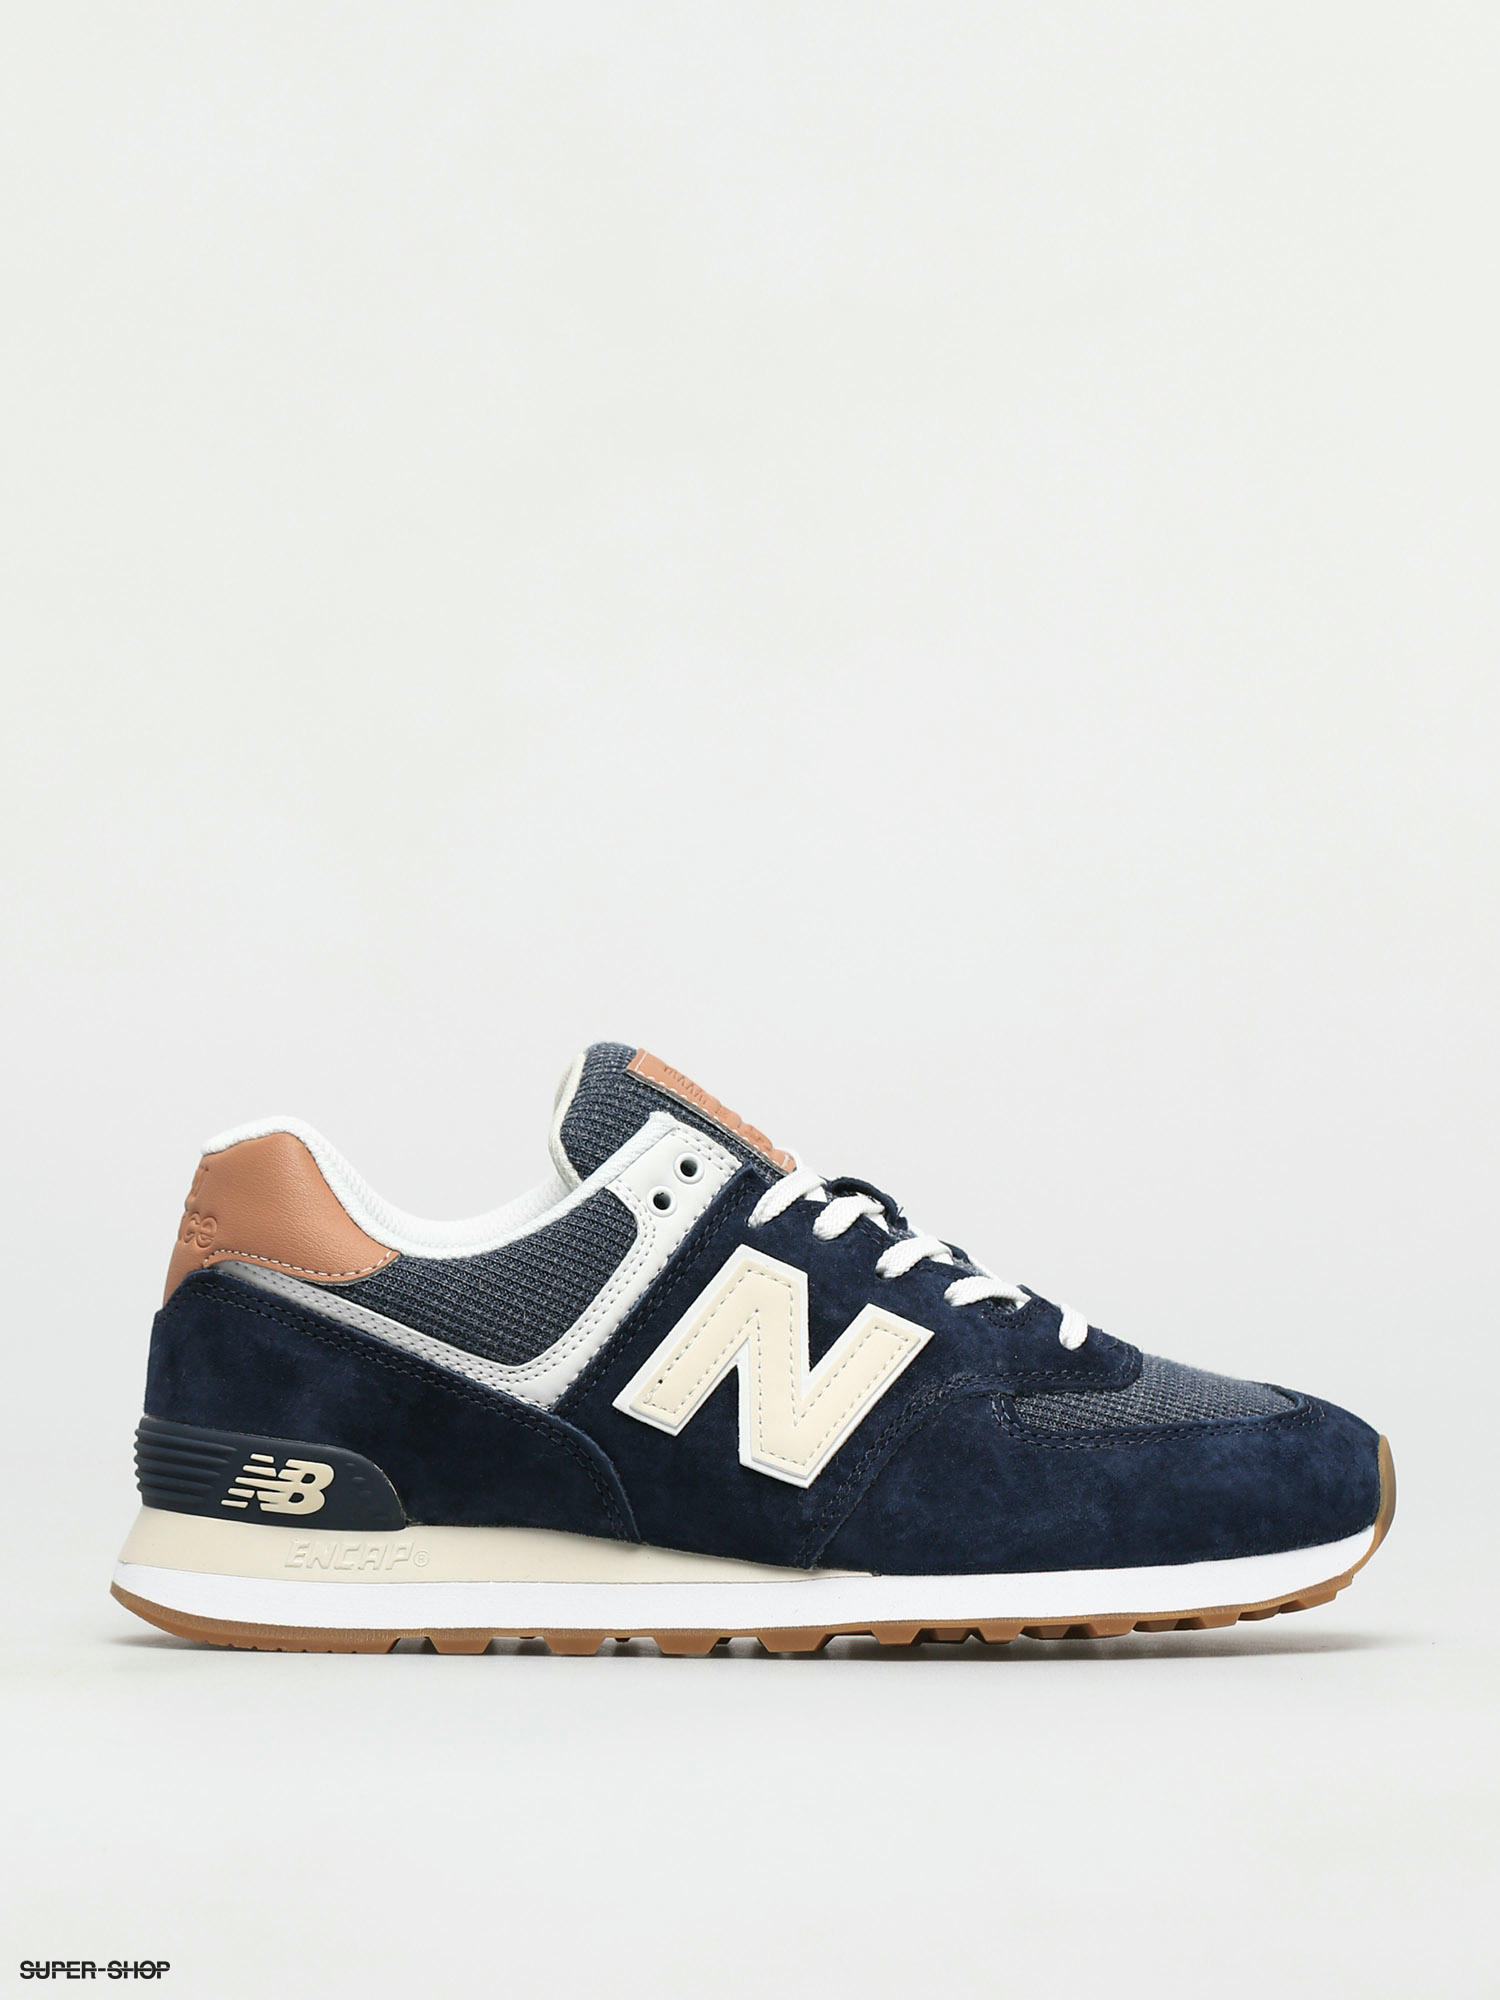 New Balance 574 Shoes (navy)